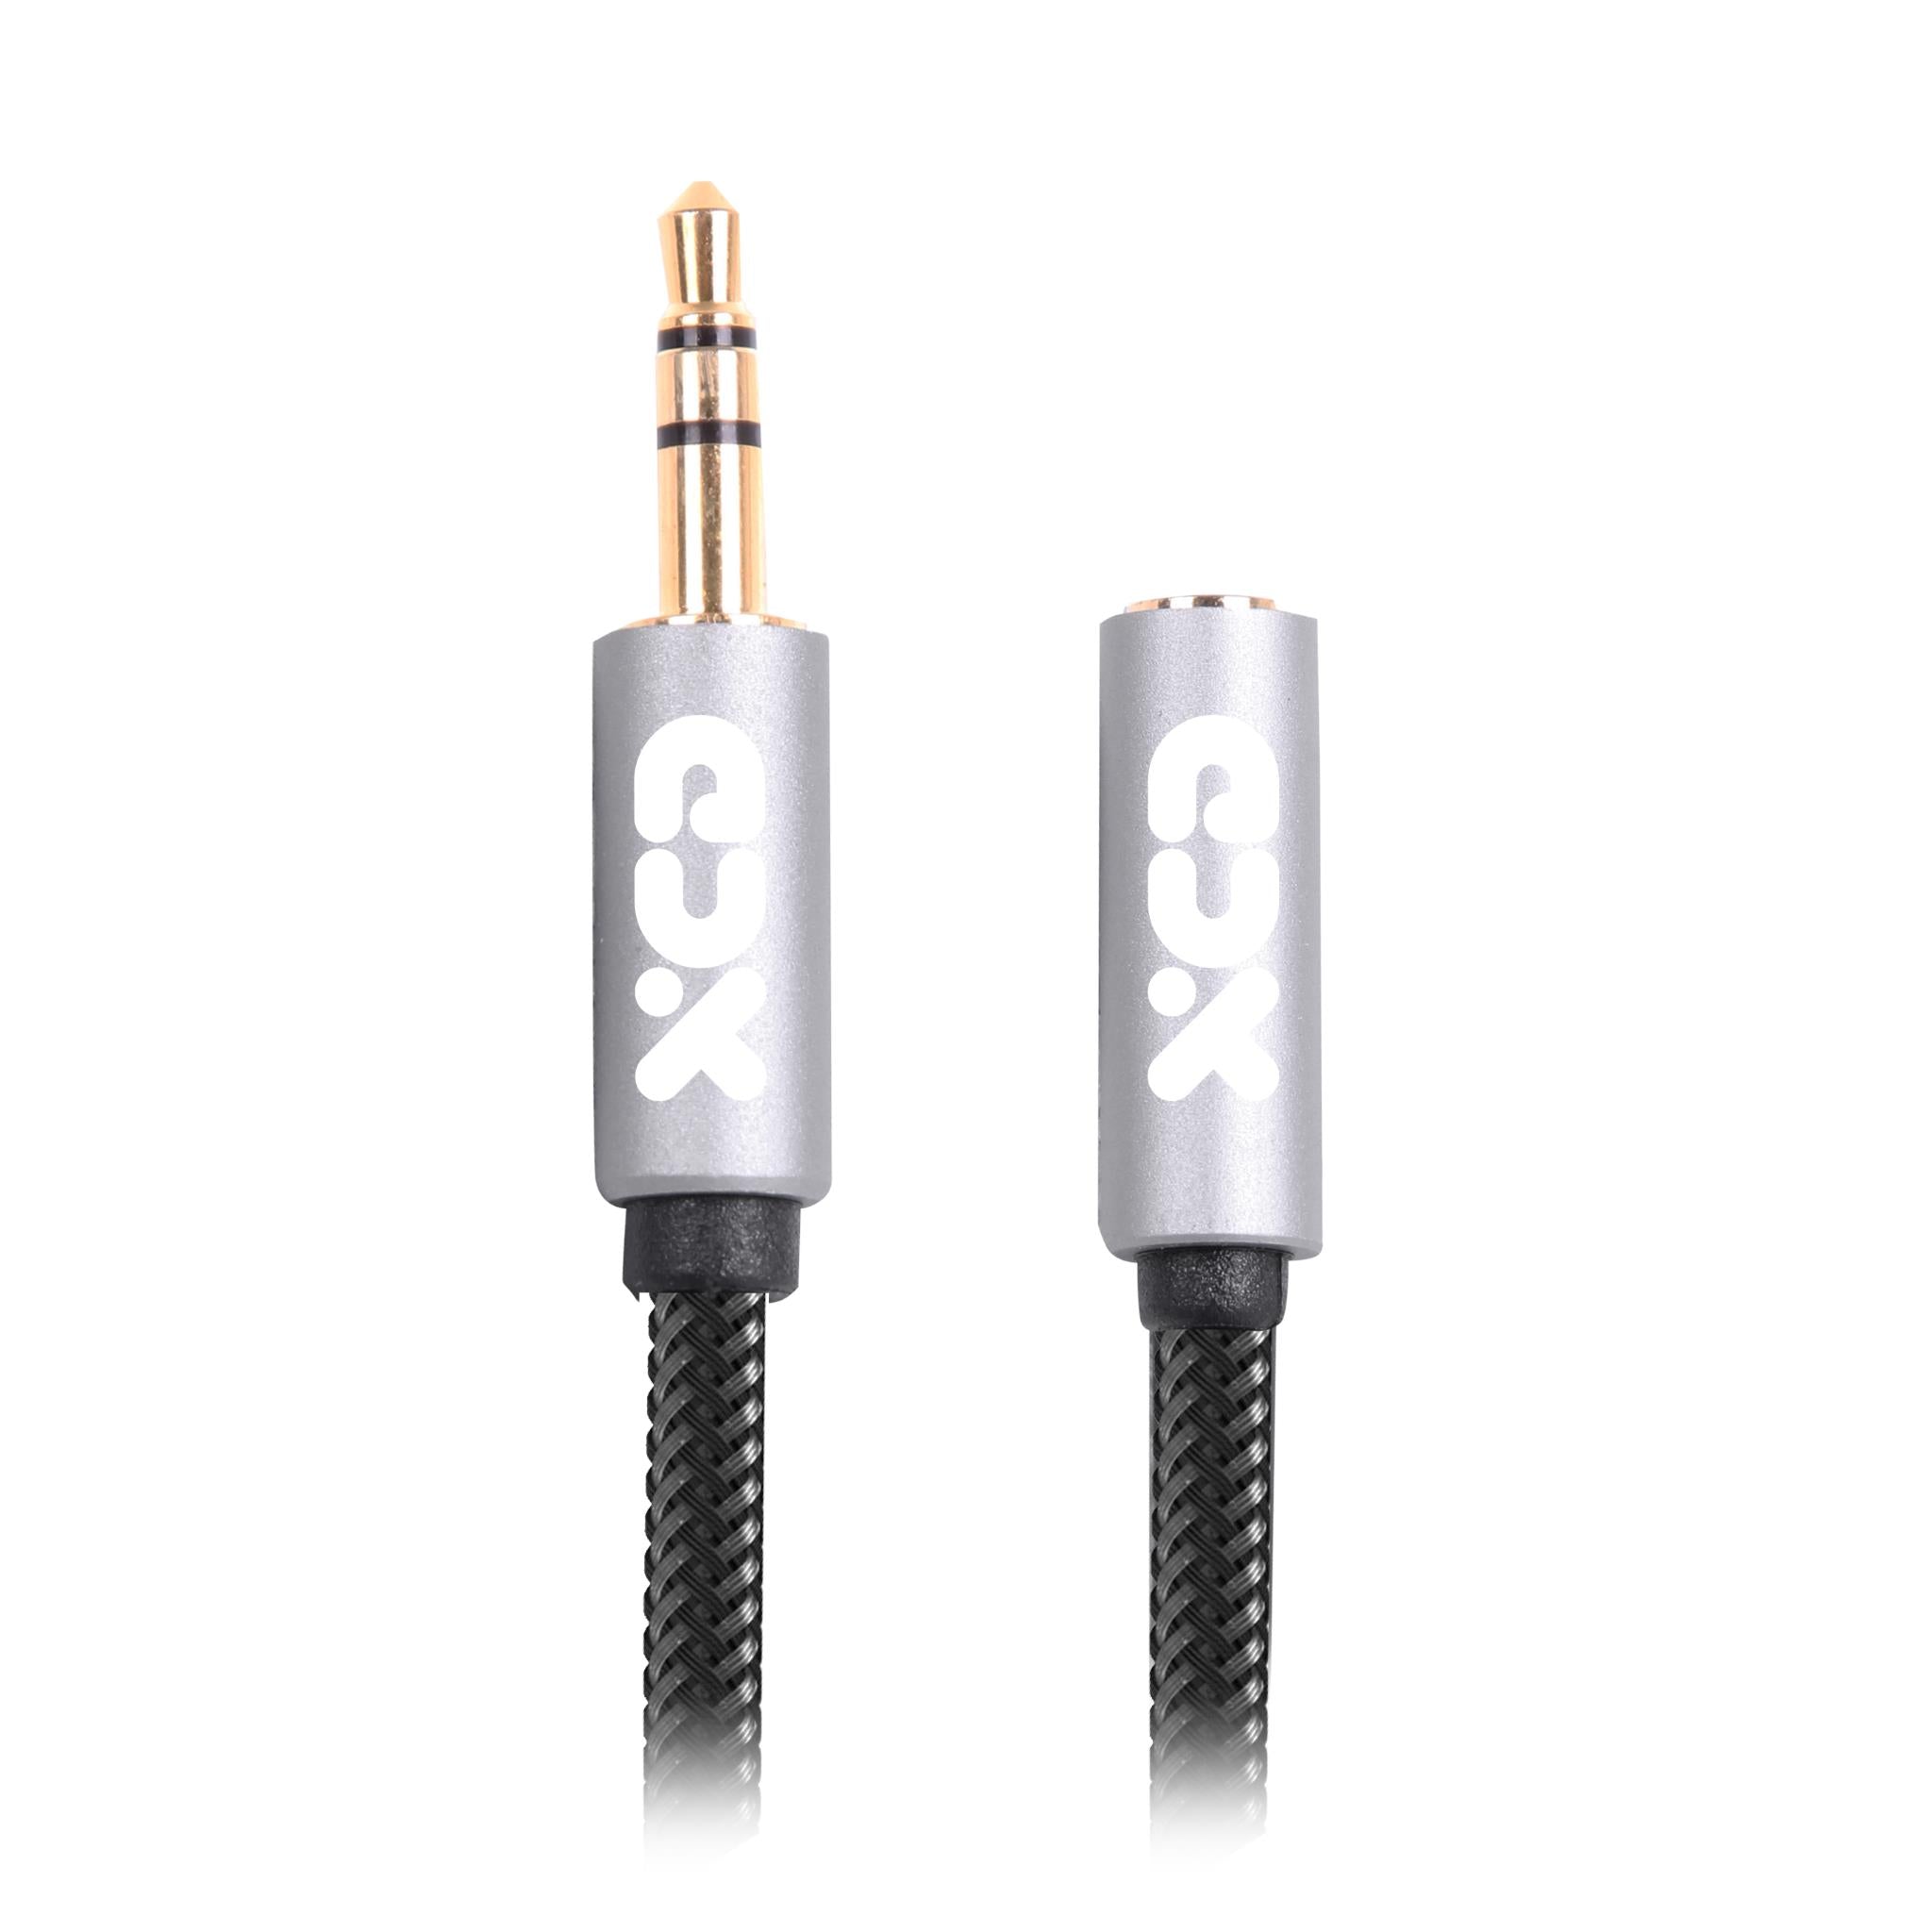 1m Slim 3.5mm Stereo Extension Audio Cable - M/F